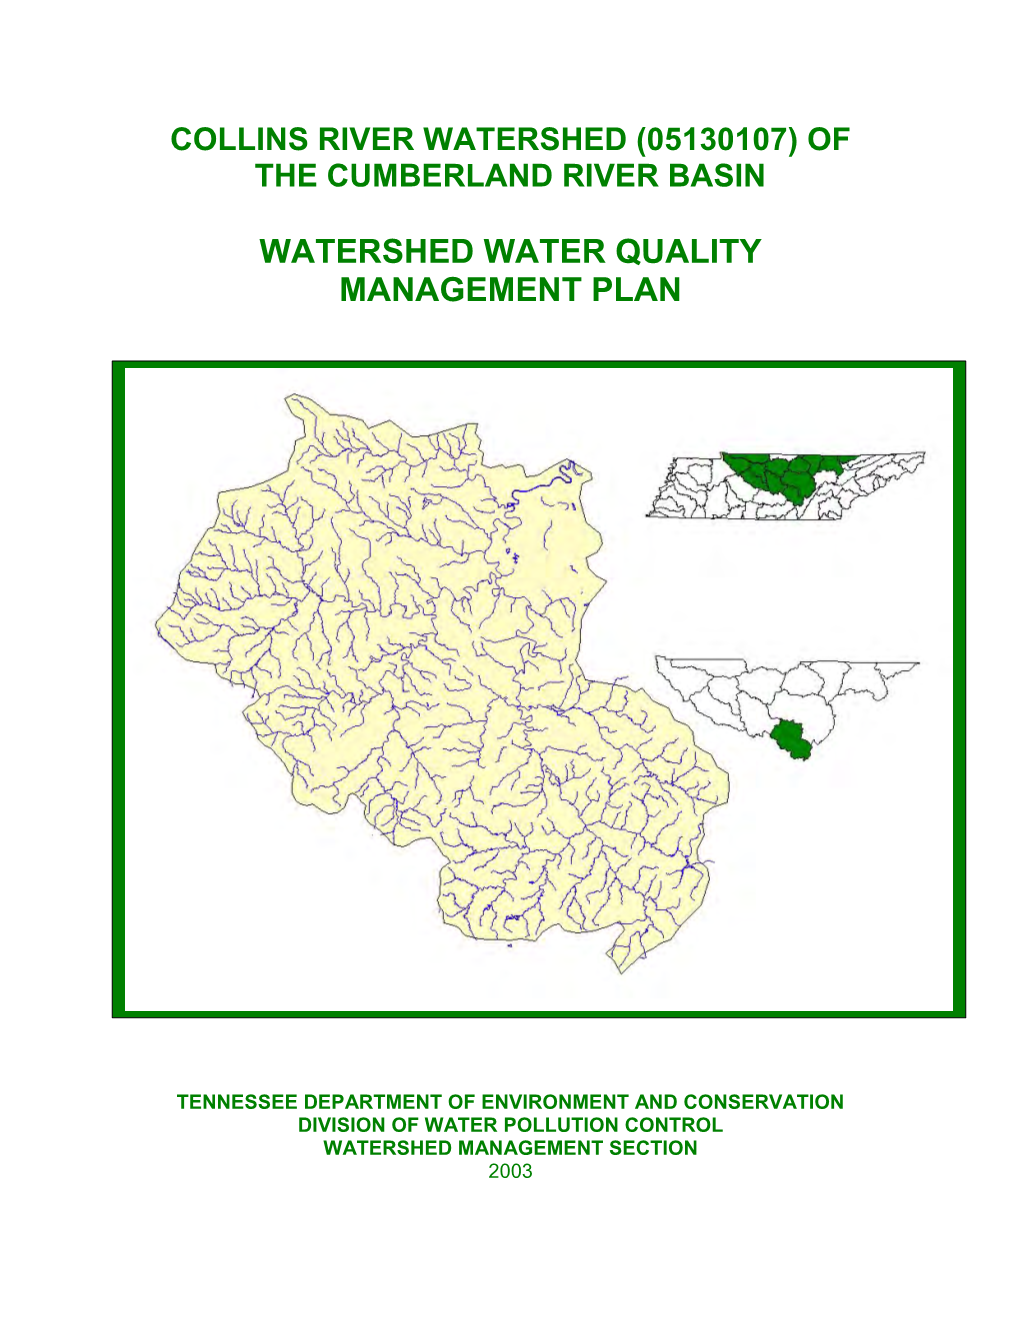 Collins River Water Quality Management Plan (2003)